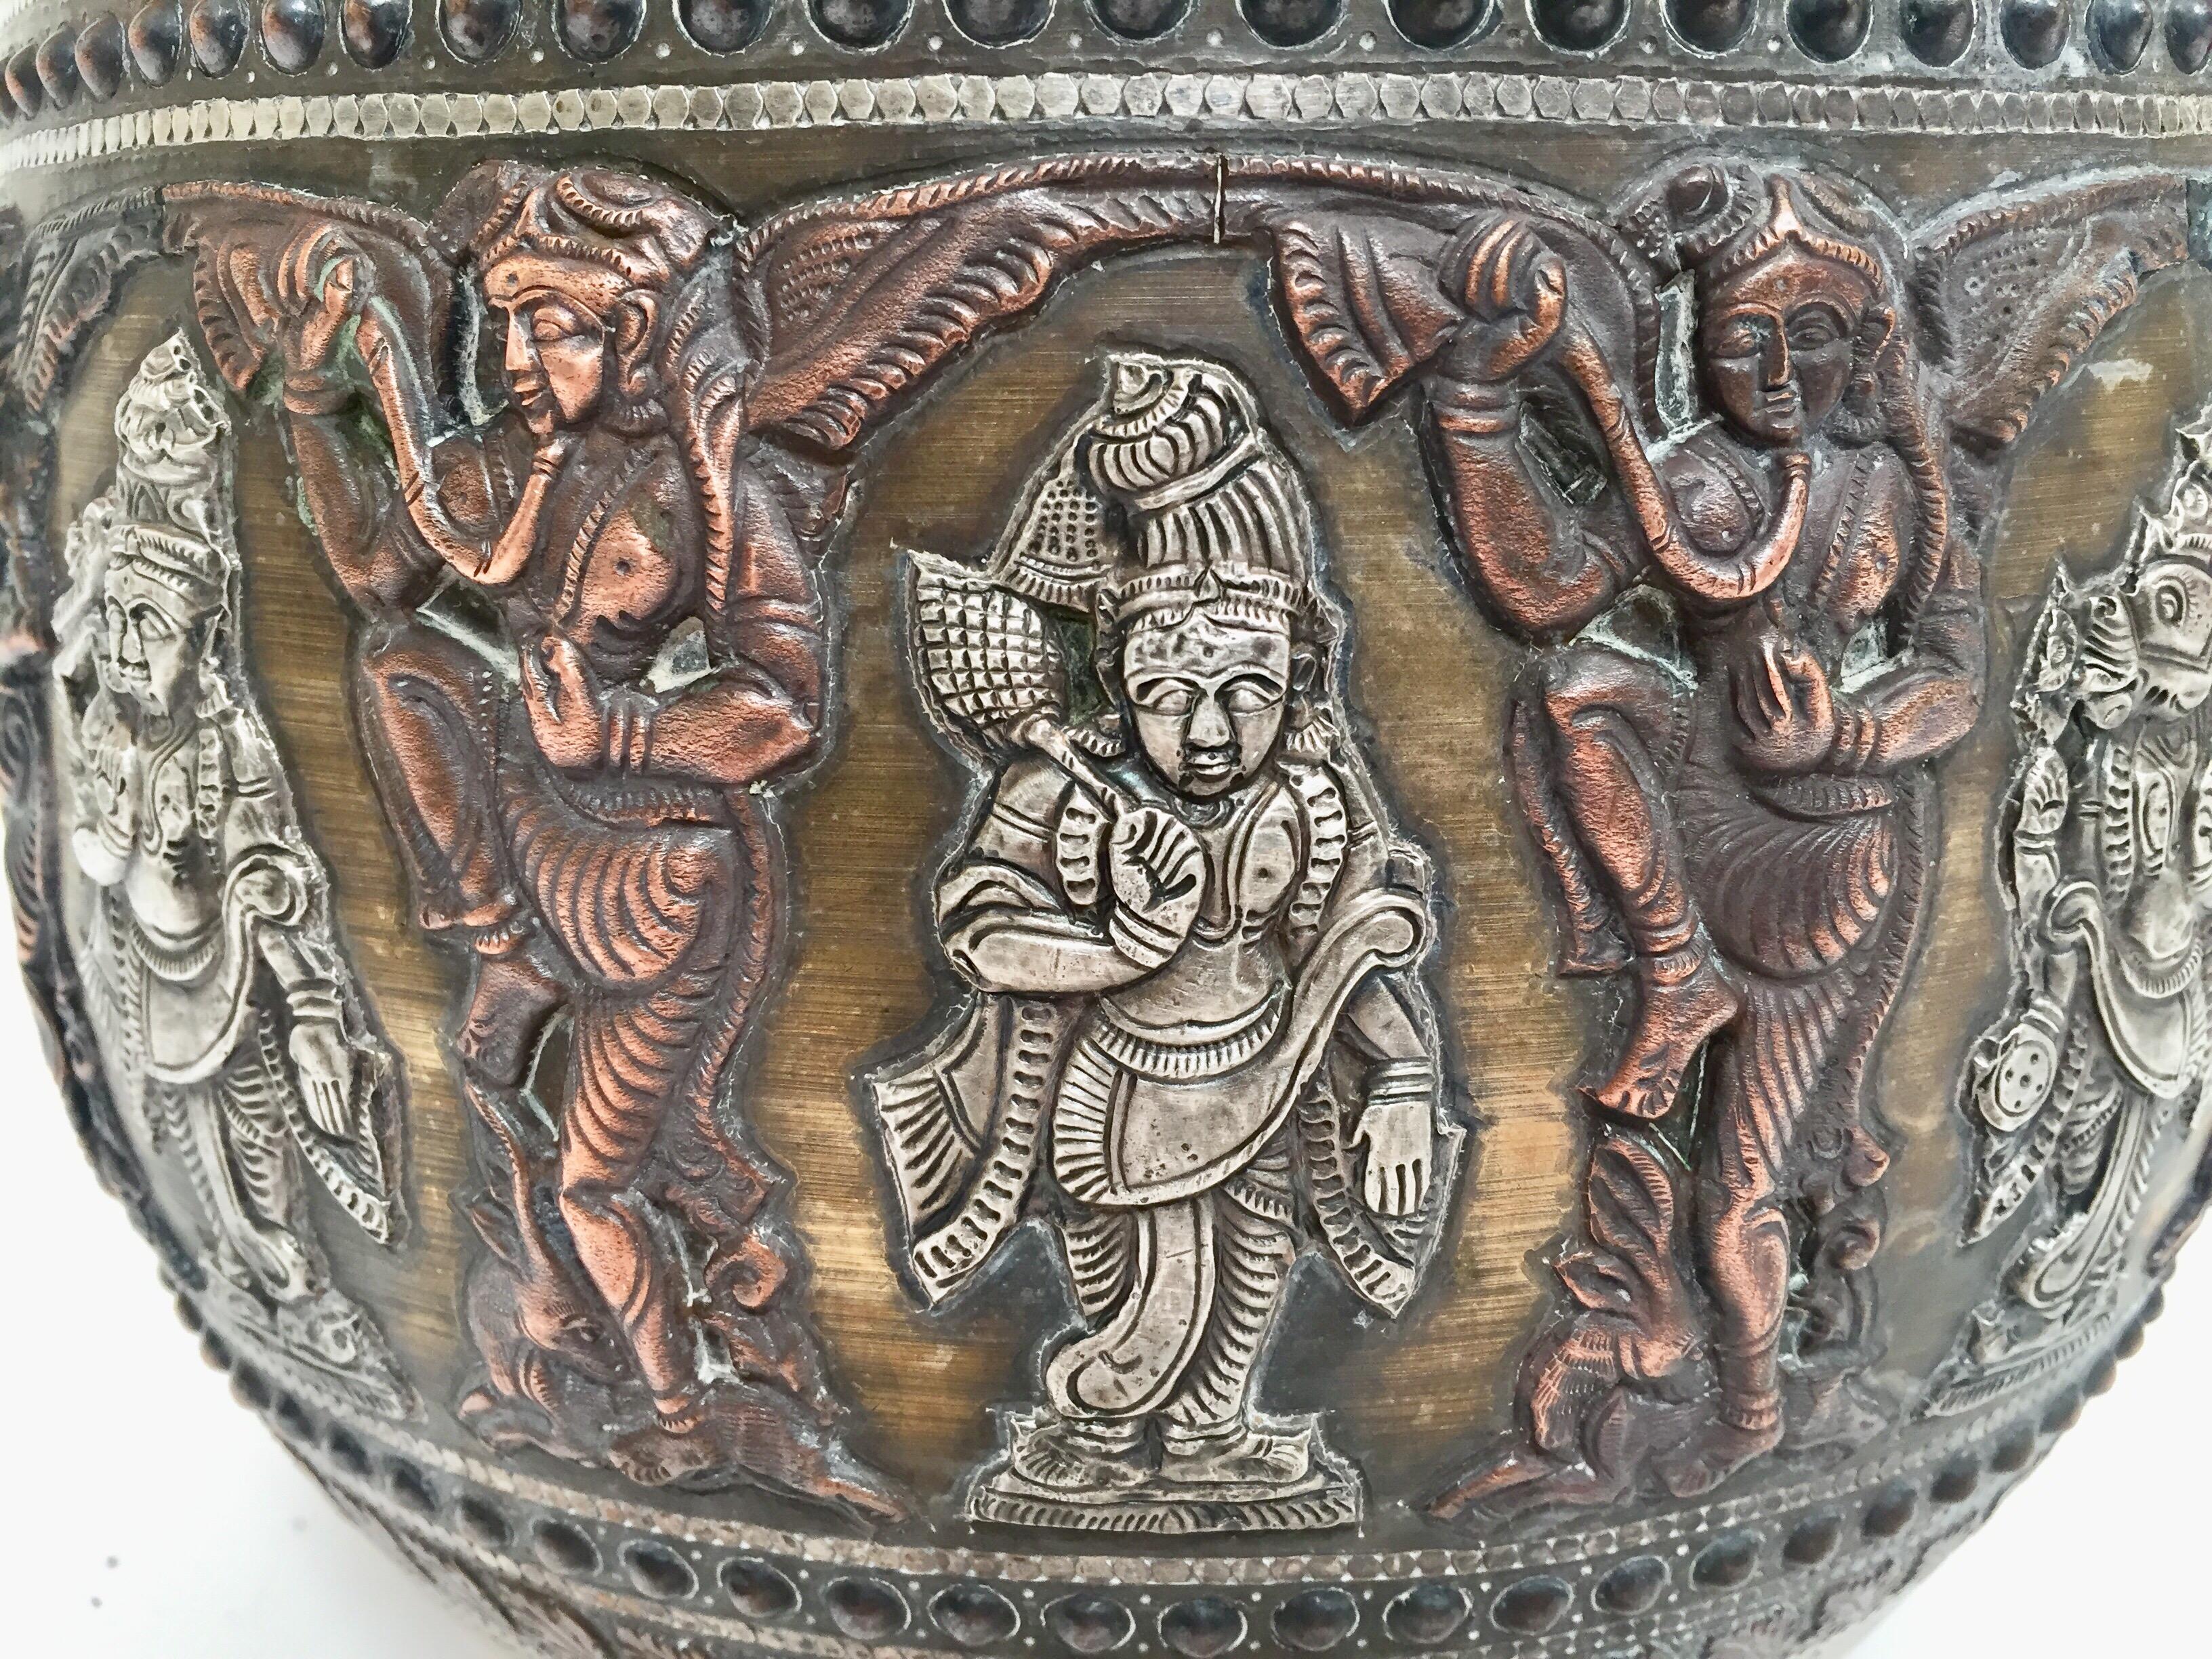 Large Burmes Brass, Copper, Silver Inlaid Ceremonial Bowl with Avatars of Vishnu For Sale 1